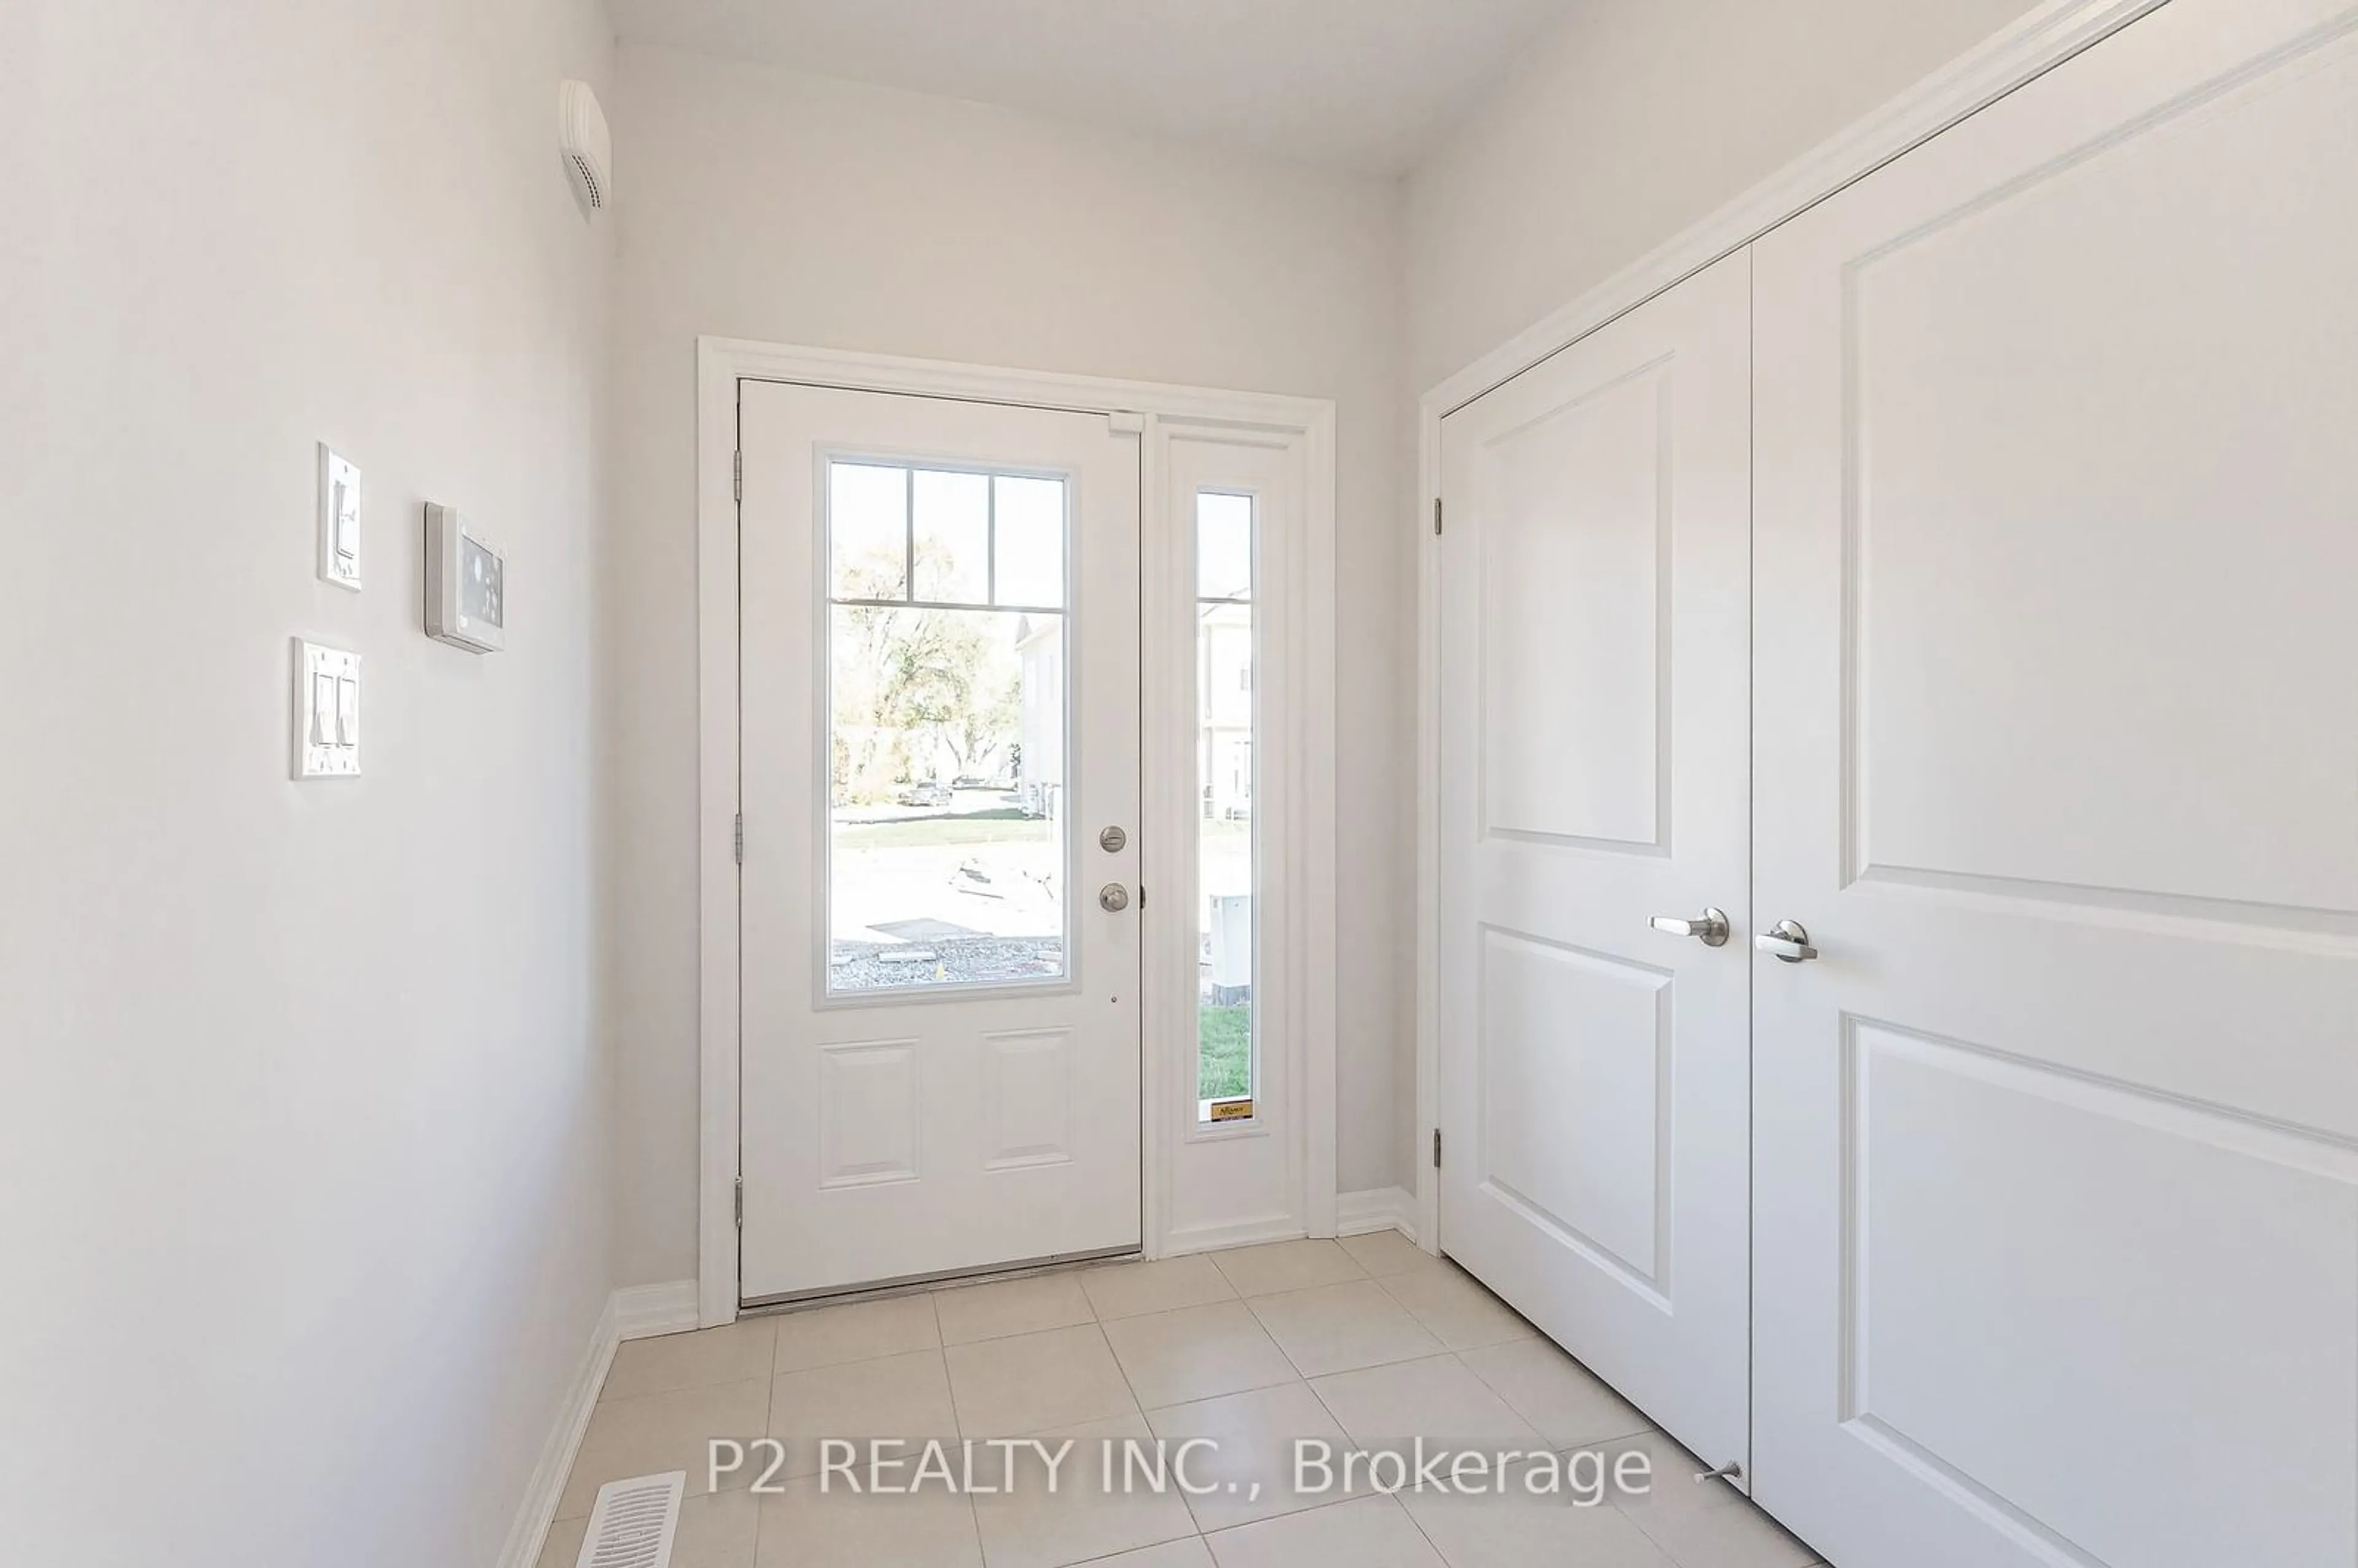 Indoor entryway for 8 Bromley Dr, St. Catharines Ontario L2M 1R1